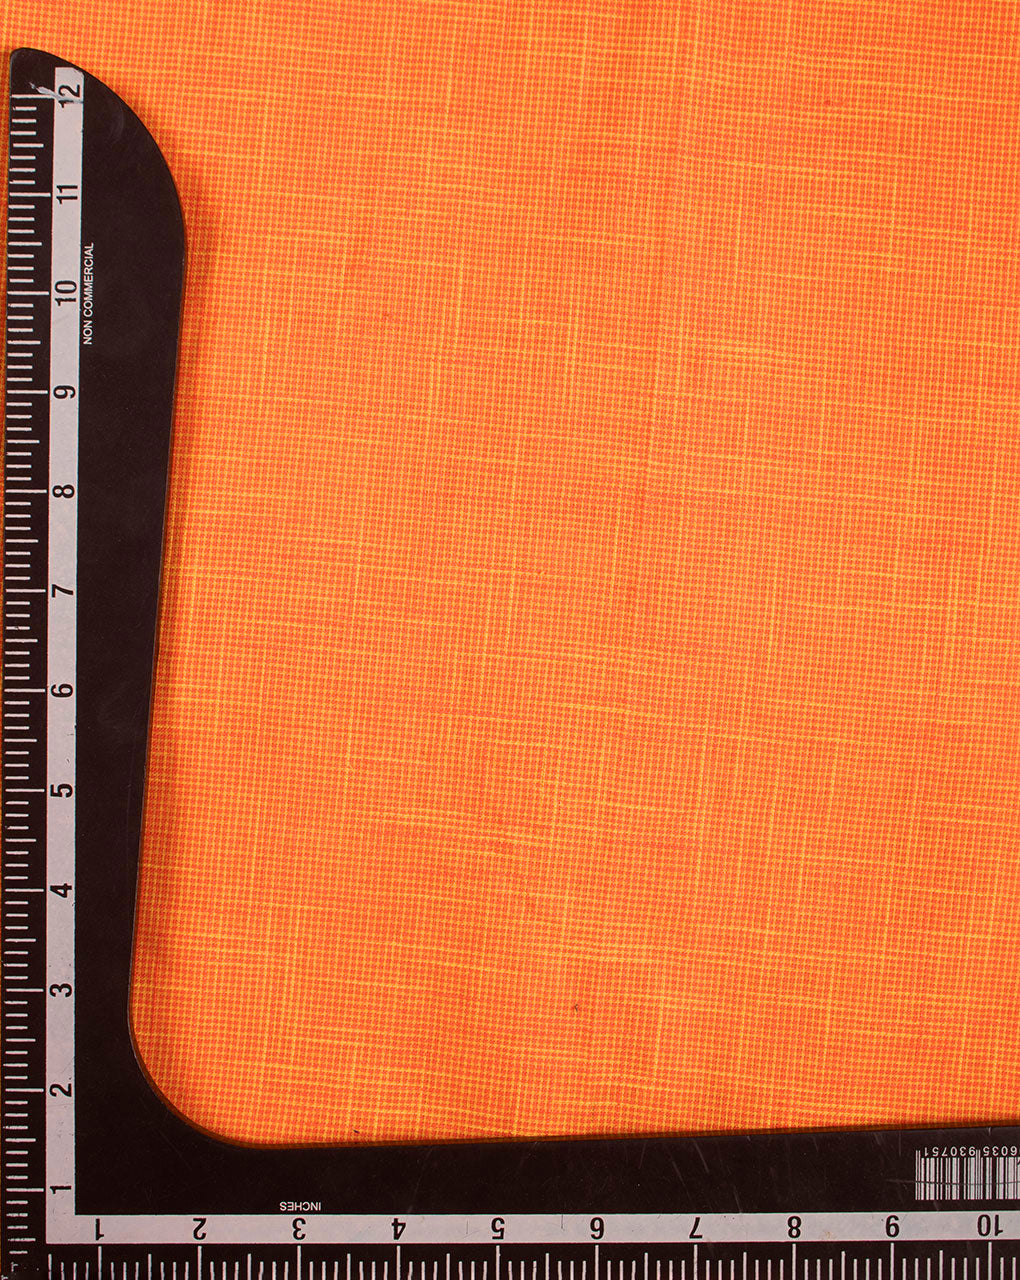 Woven Loom Textured 20'S Cotton Fabric - Fabriclore.com